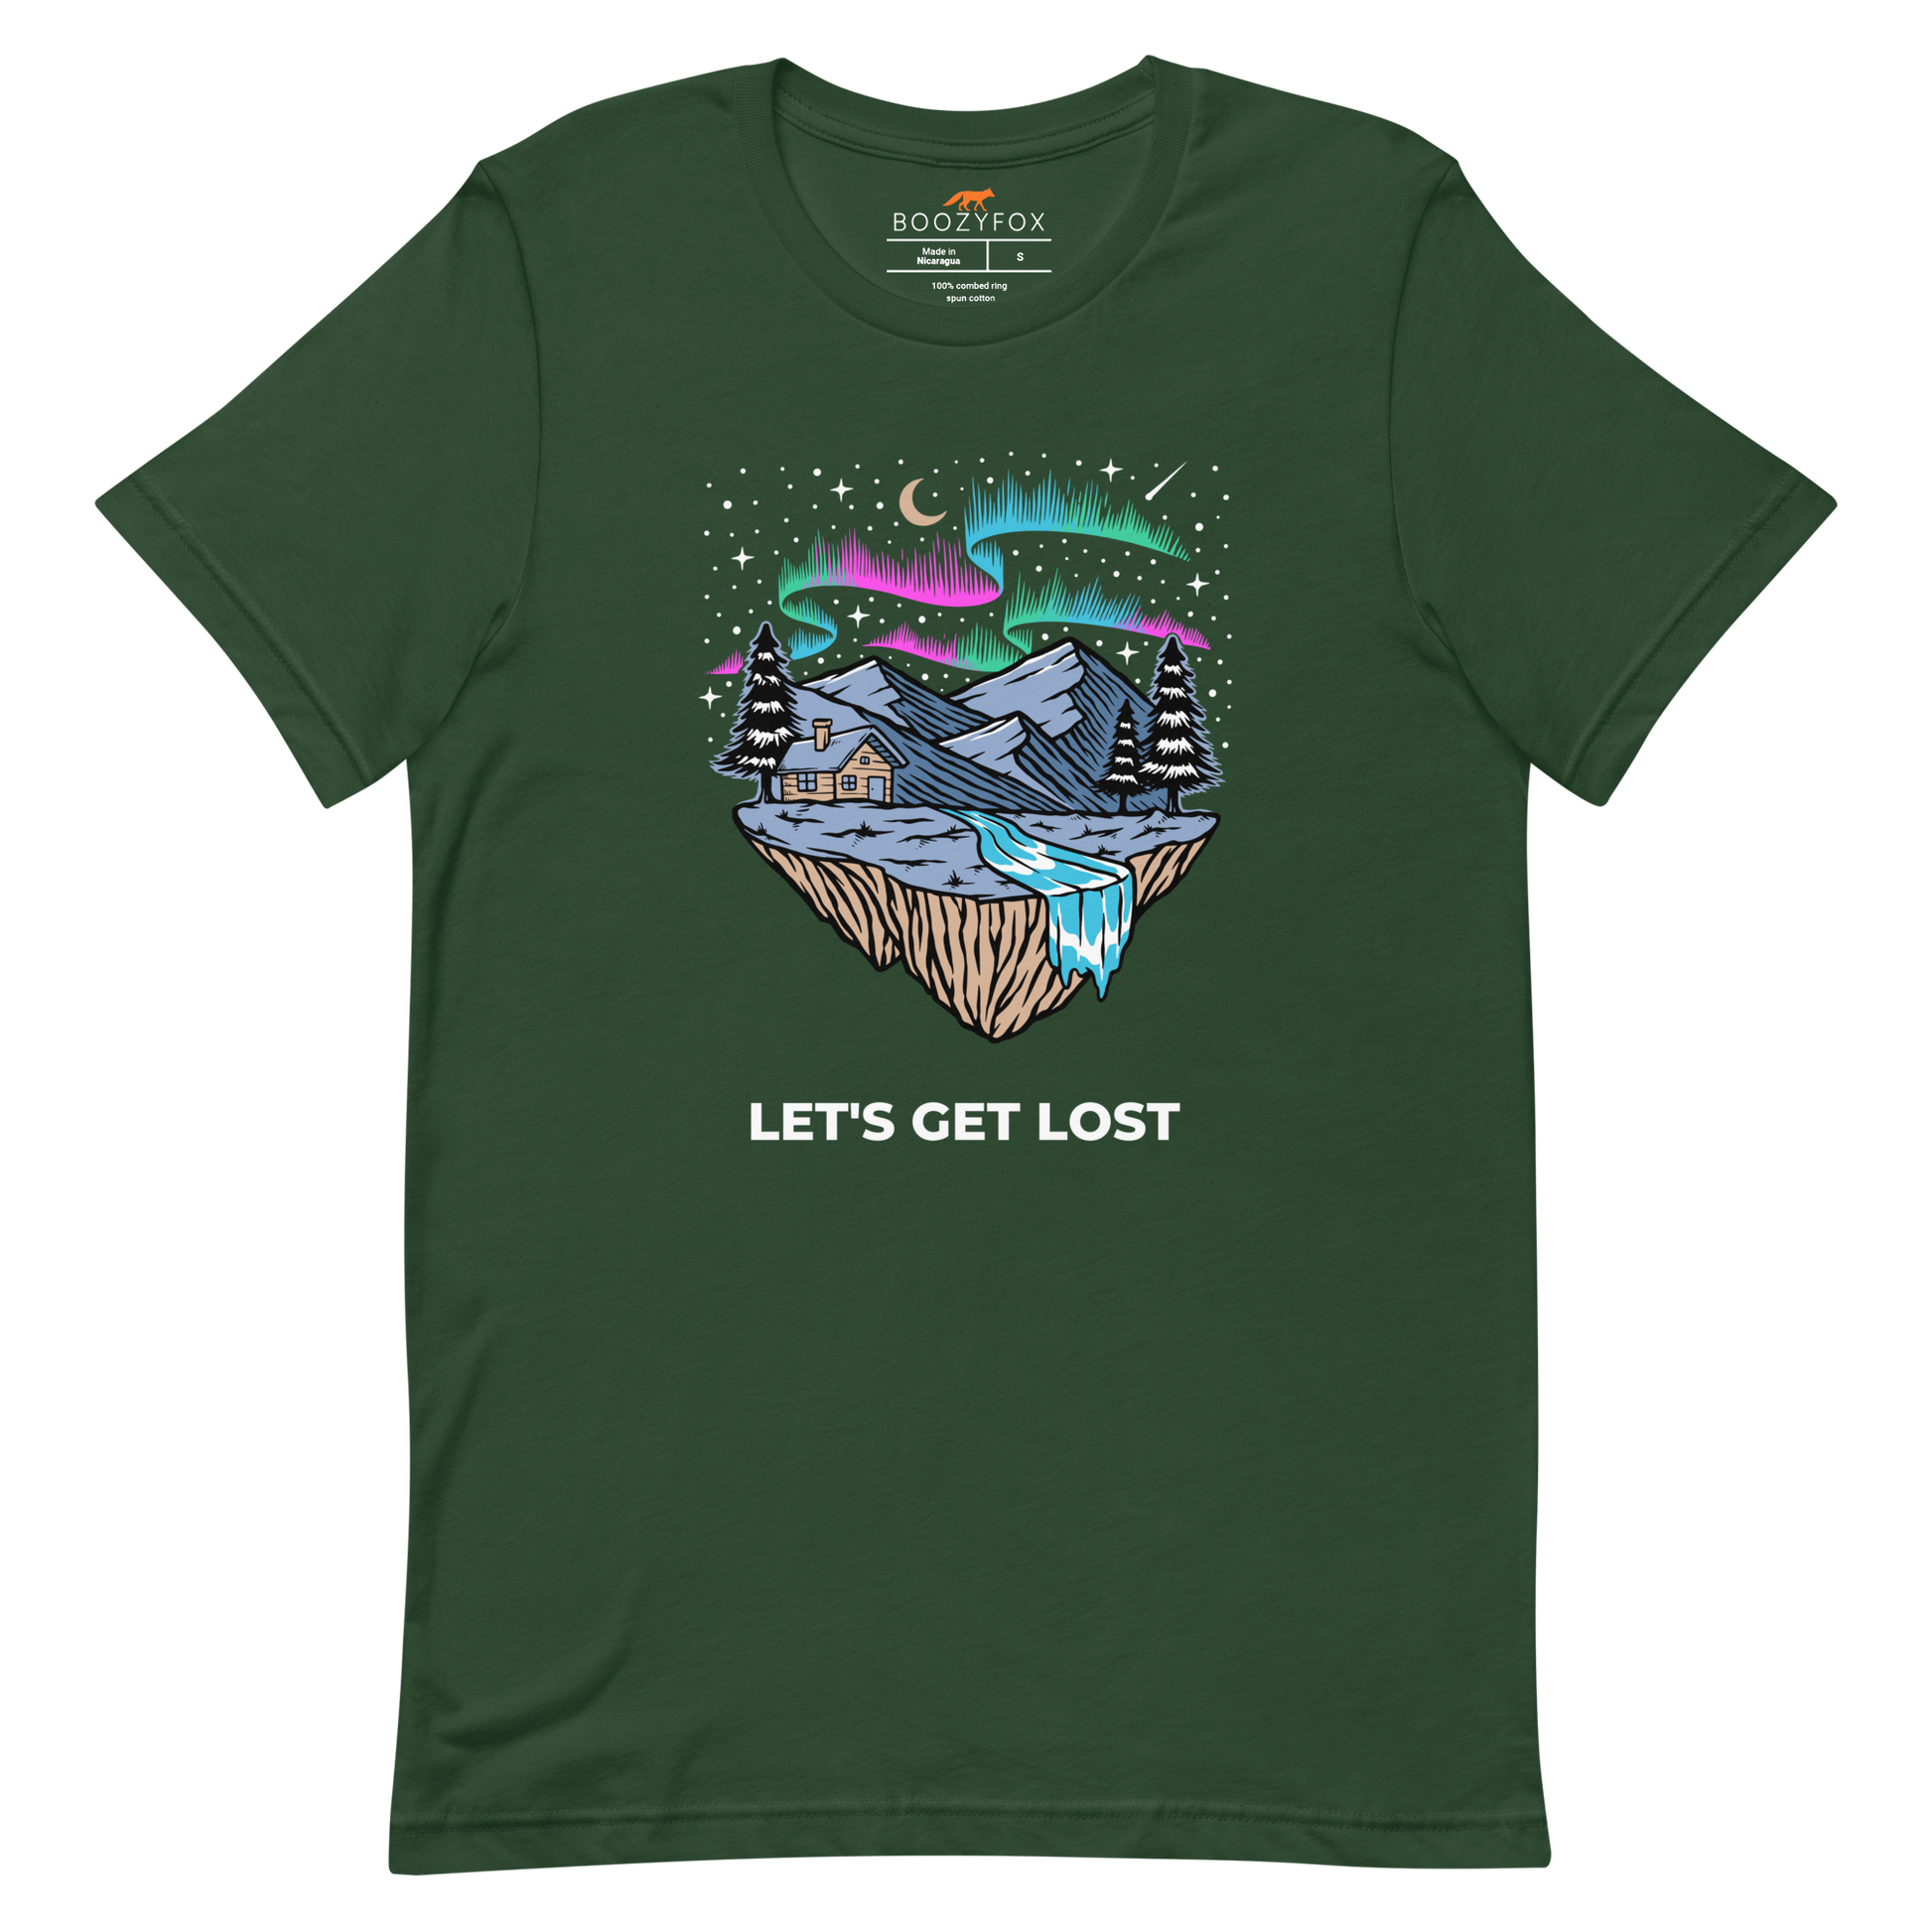 Forest Green Premium Let's Get Lost Tee featuring a mesmerizing night sky, adorned with stars and aurora borealis graphic on the chest - Cool Graphic Northern Lights Tees - Boozy Fox